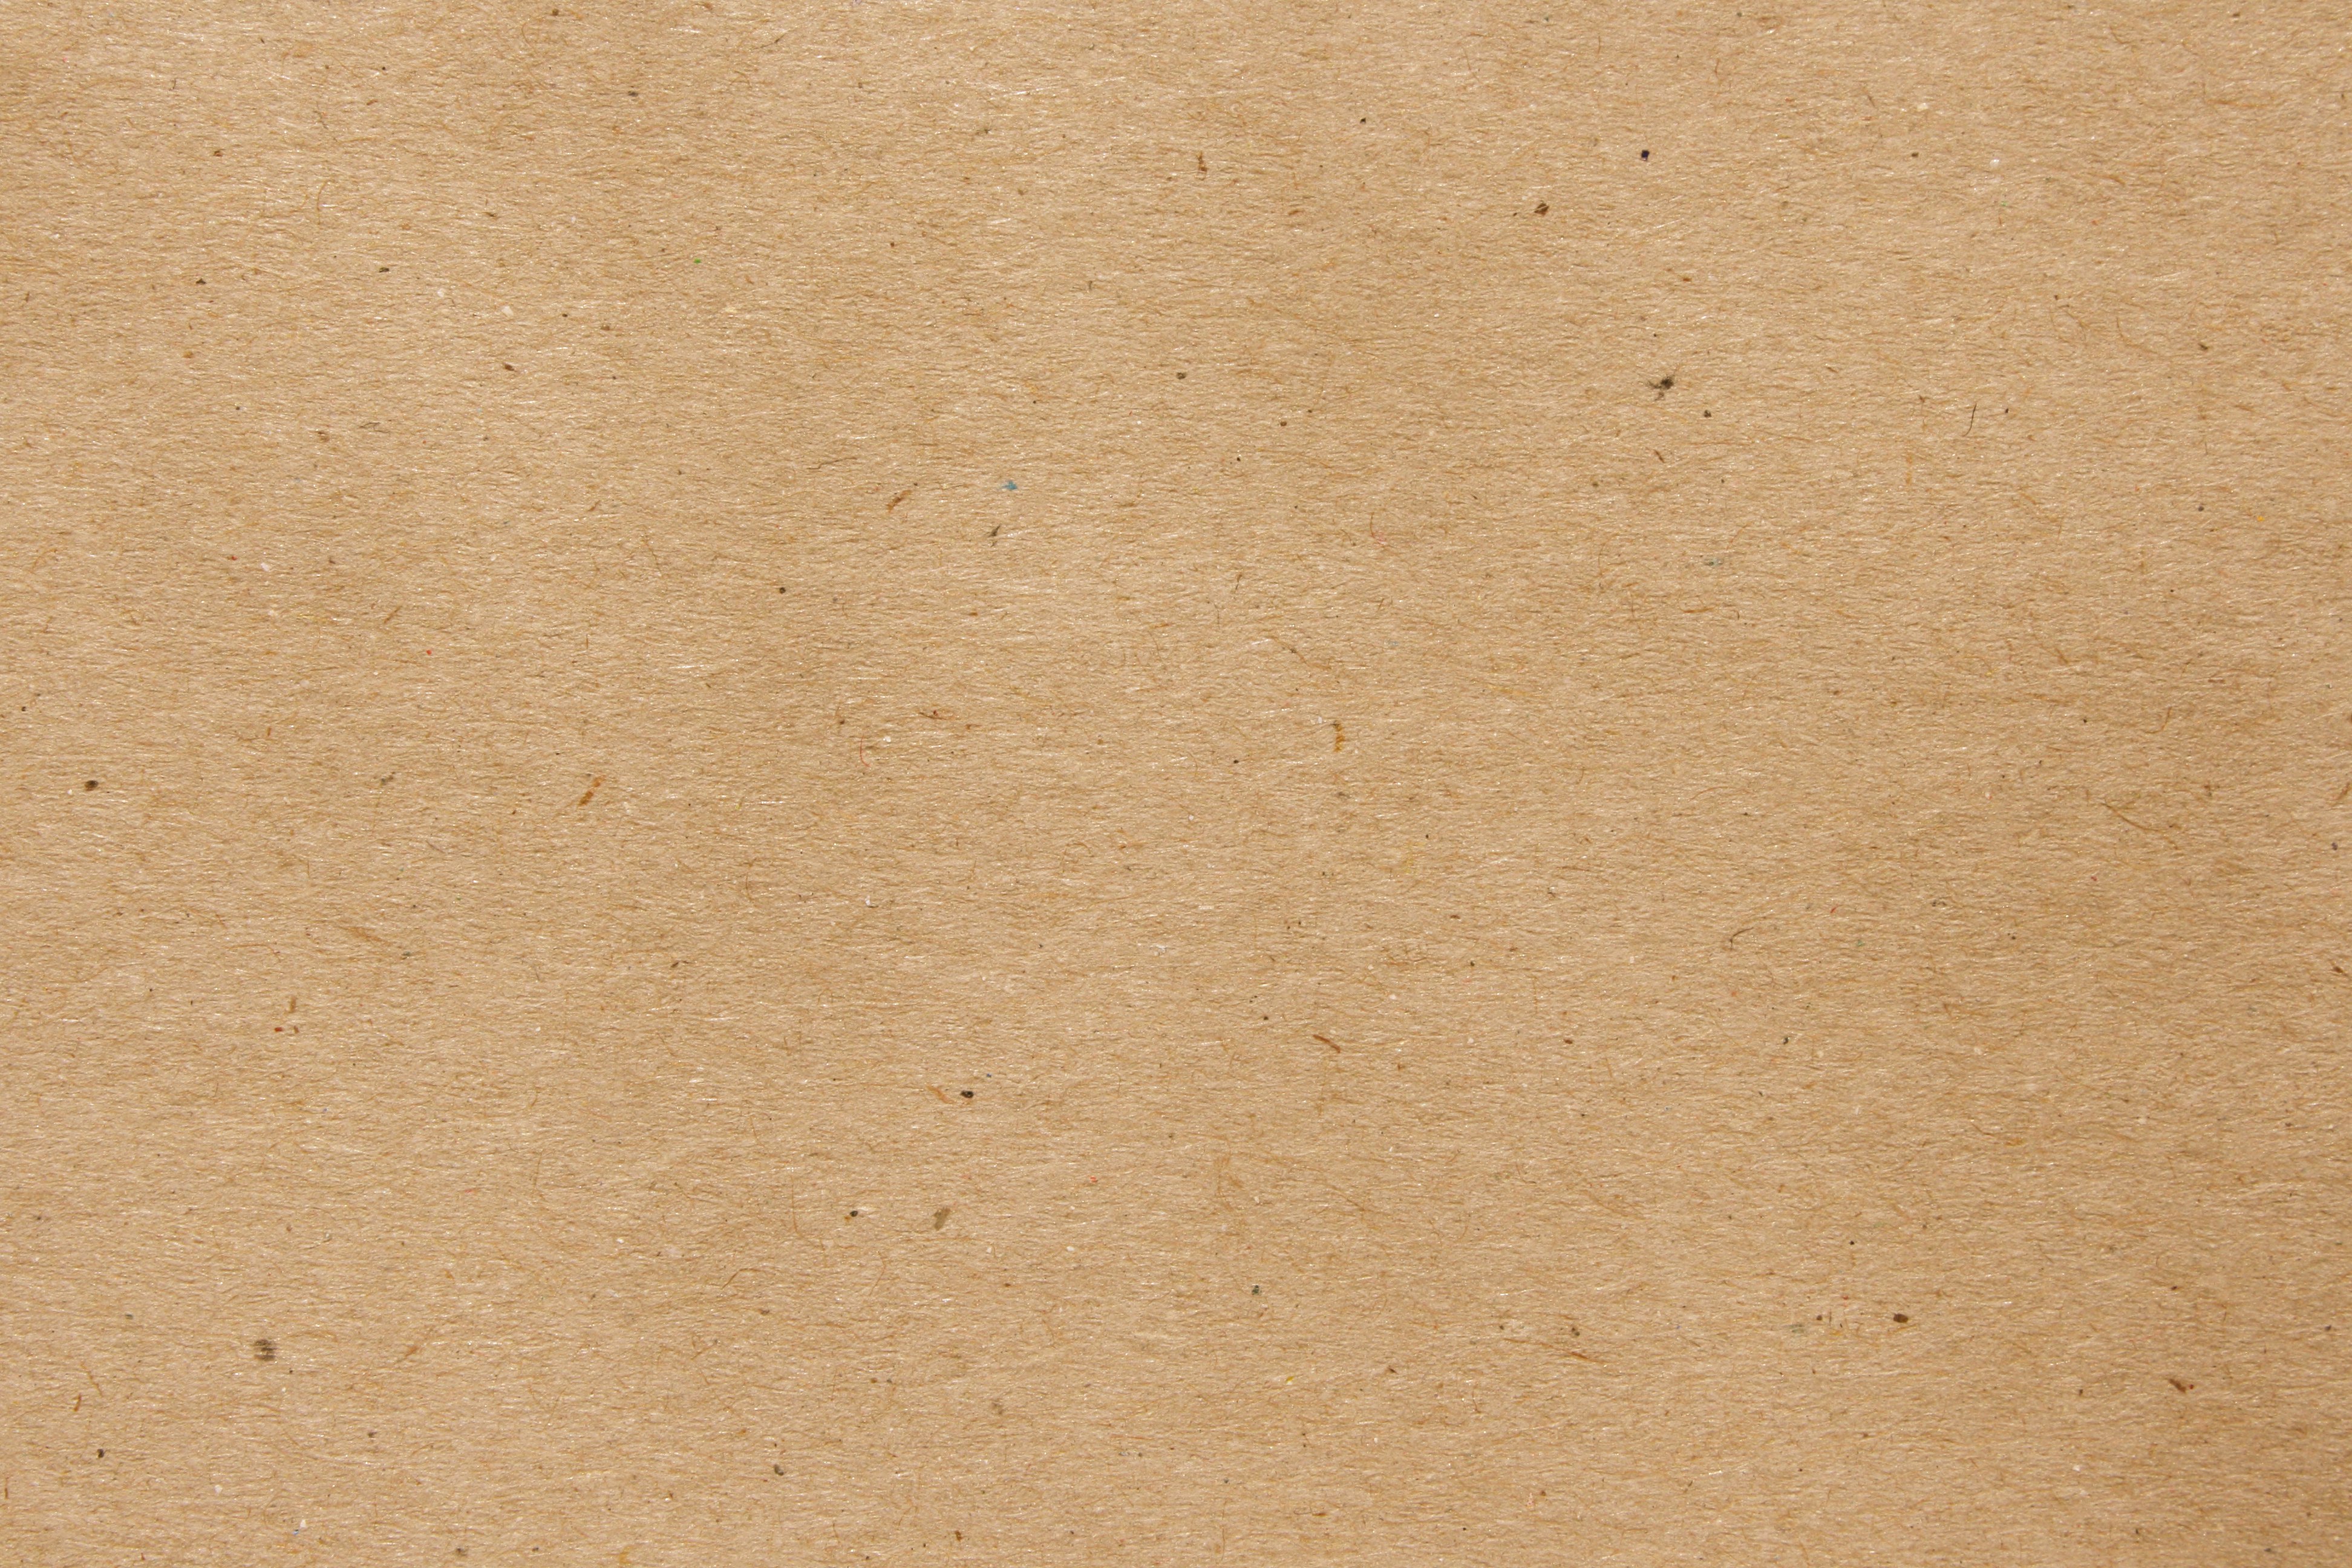 Light Brown or Tan Paper Texture with Flecks Picture. Free Photograph. Photo Public Domain